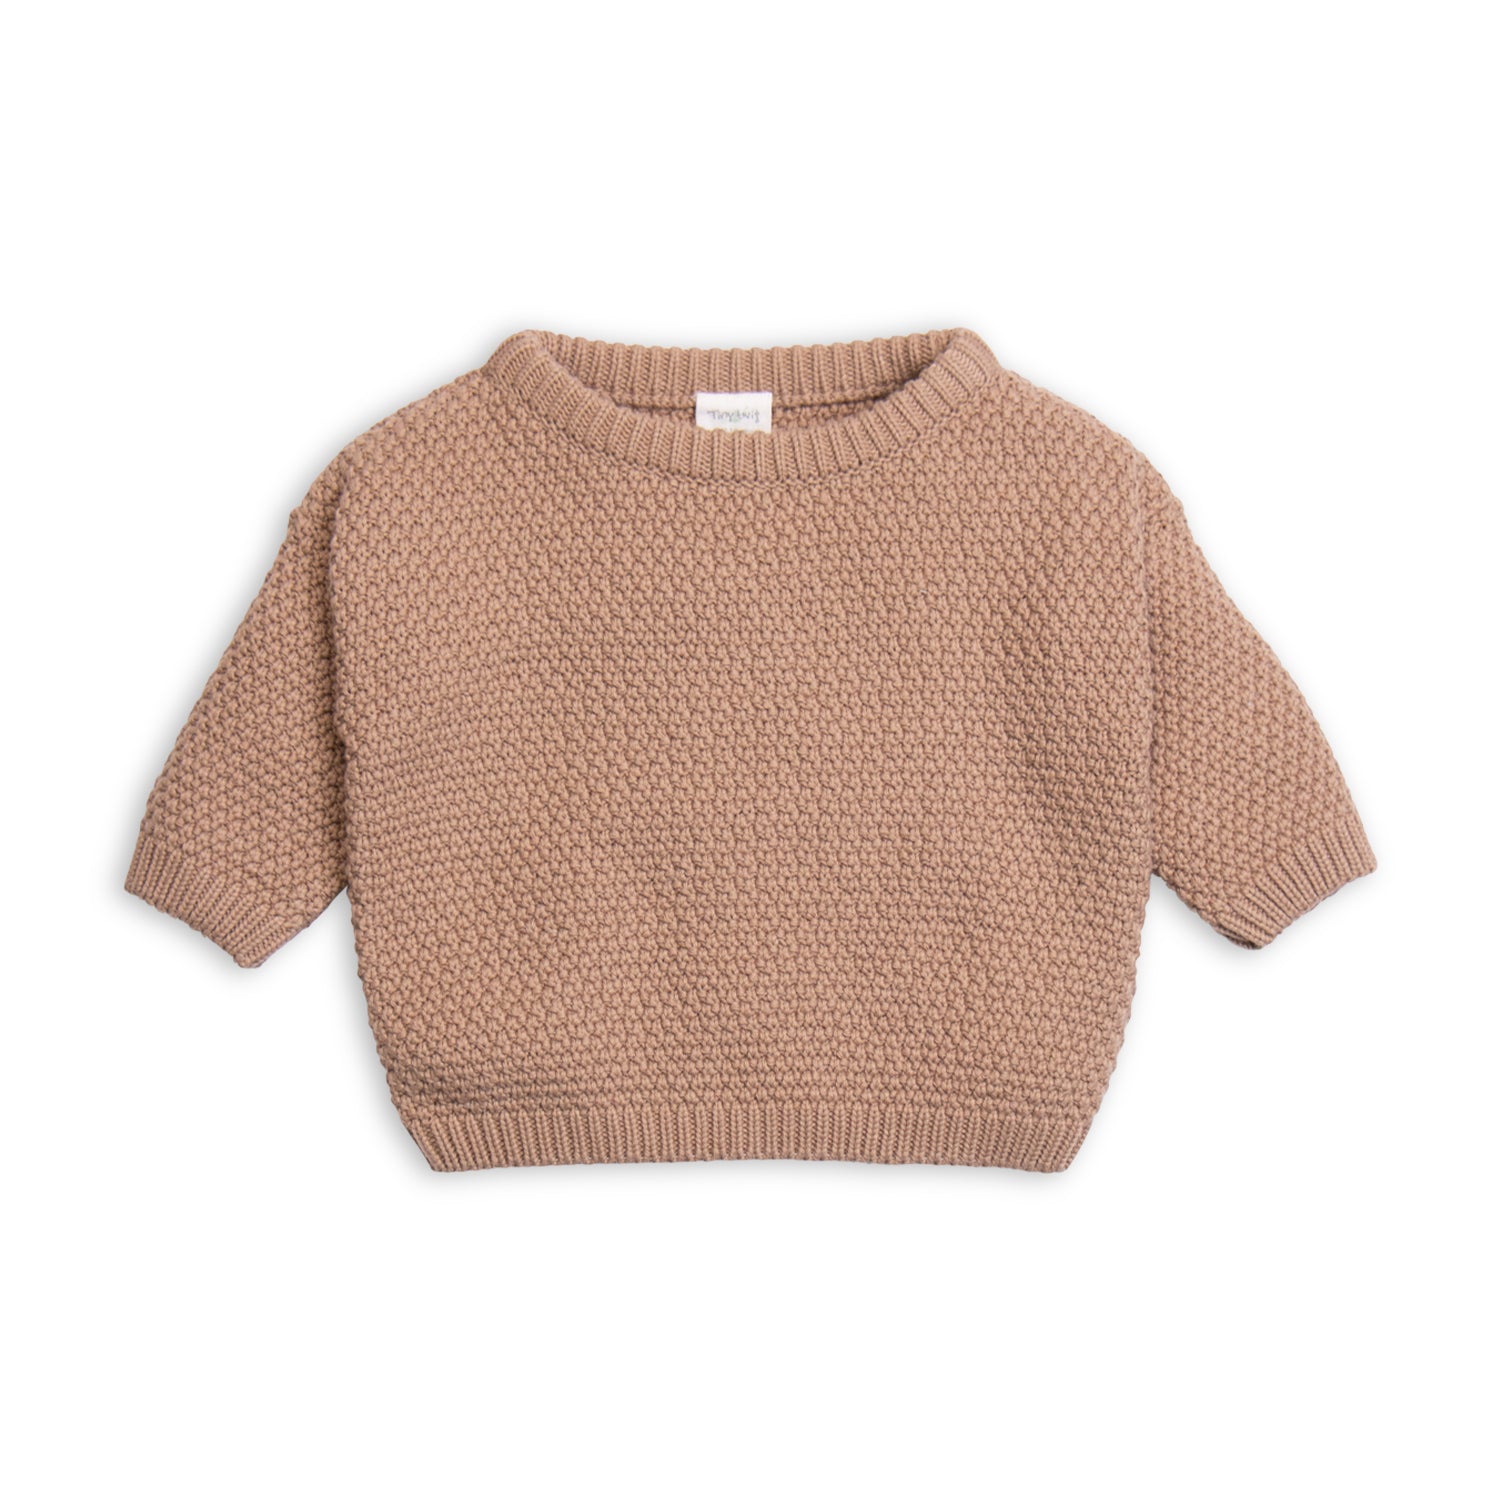 Tiny Twig Knitted Moss Knit Jumper - Cafe